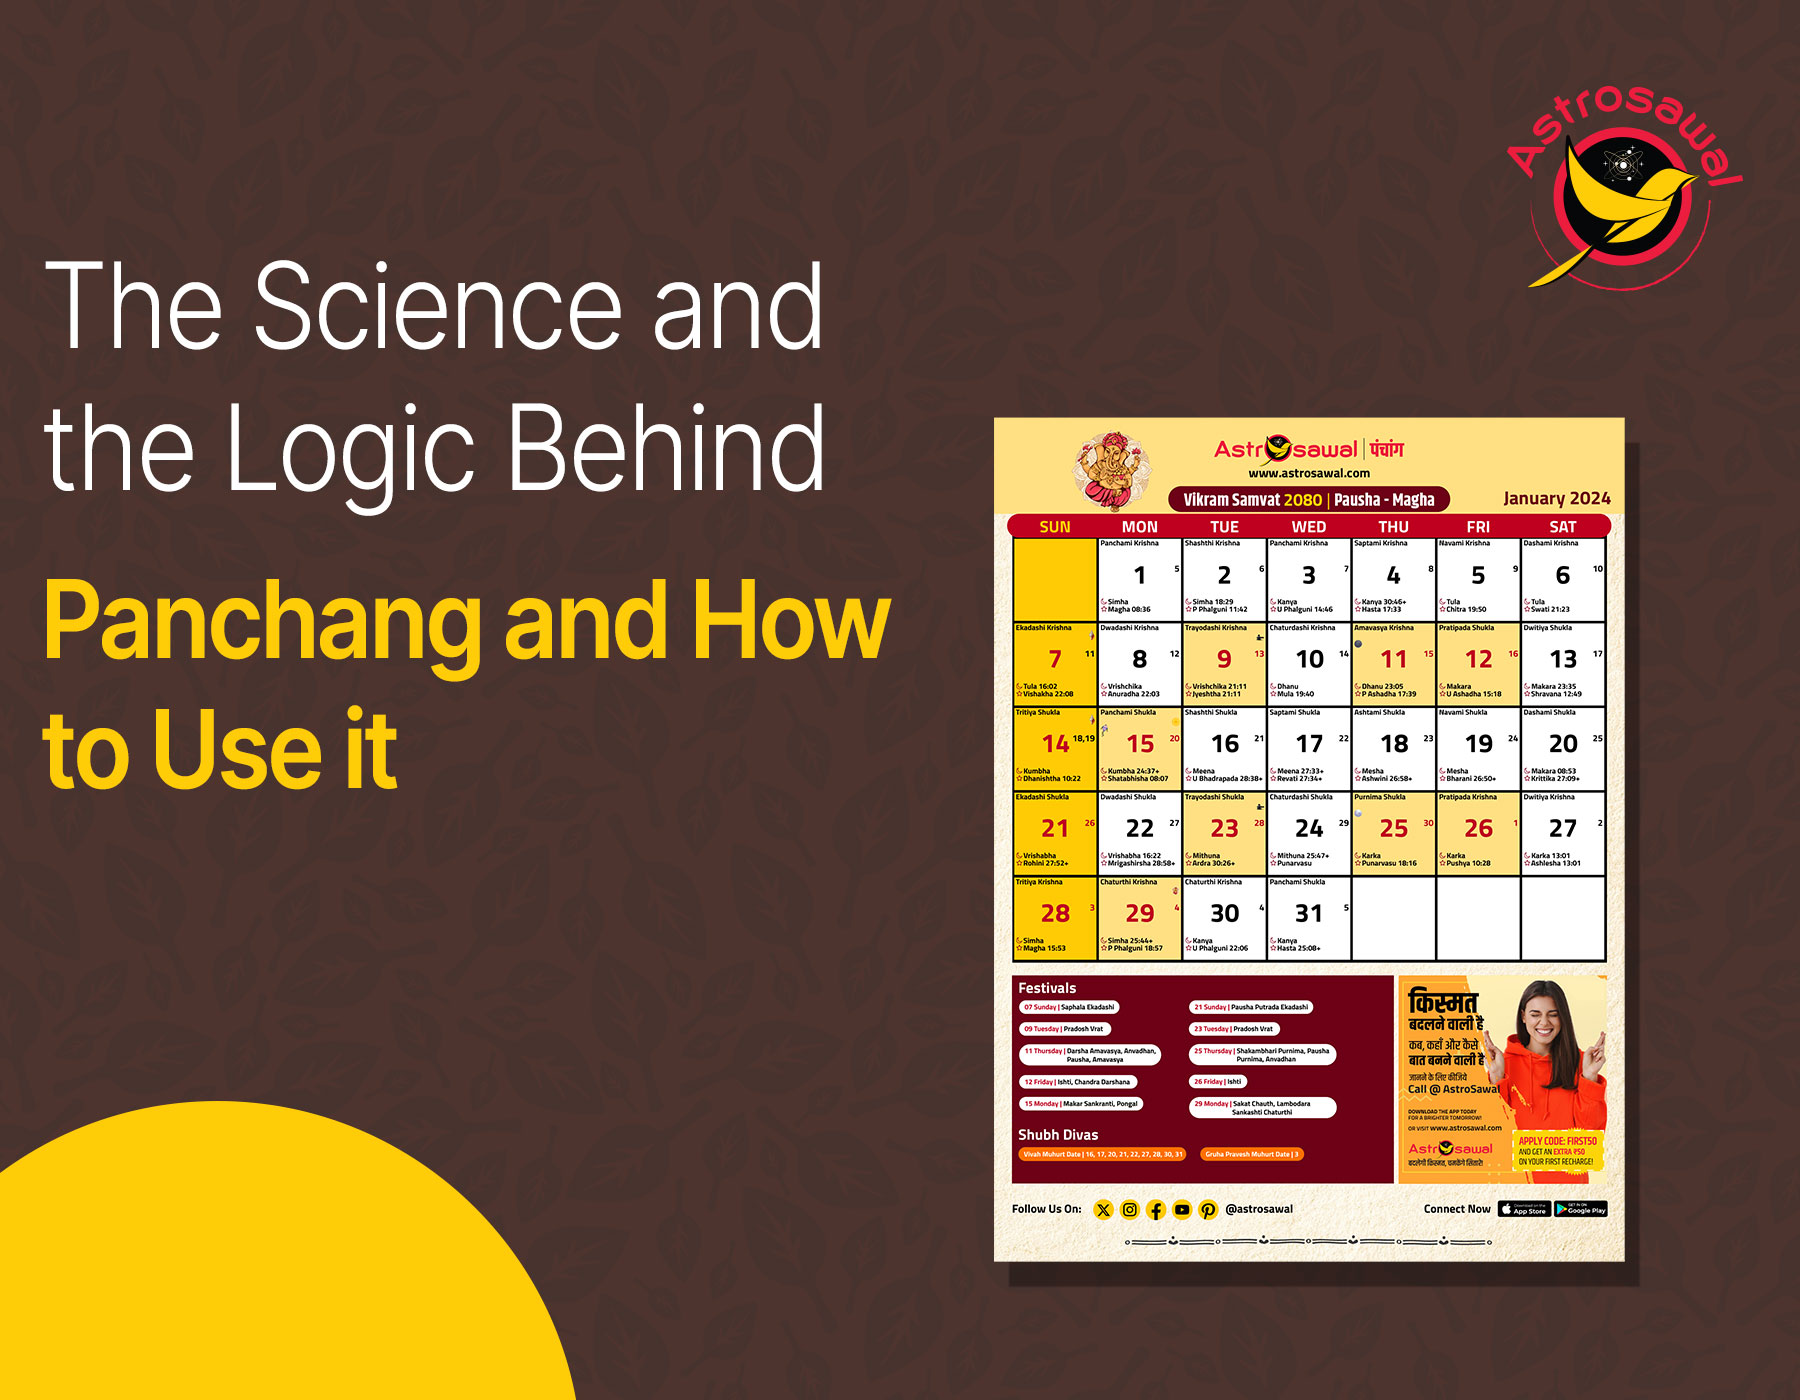 The Science and the Logic Behind Panchang and How to Use it